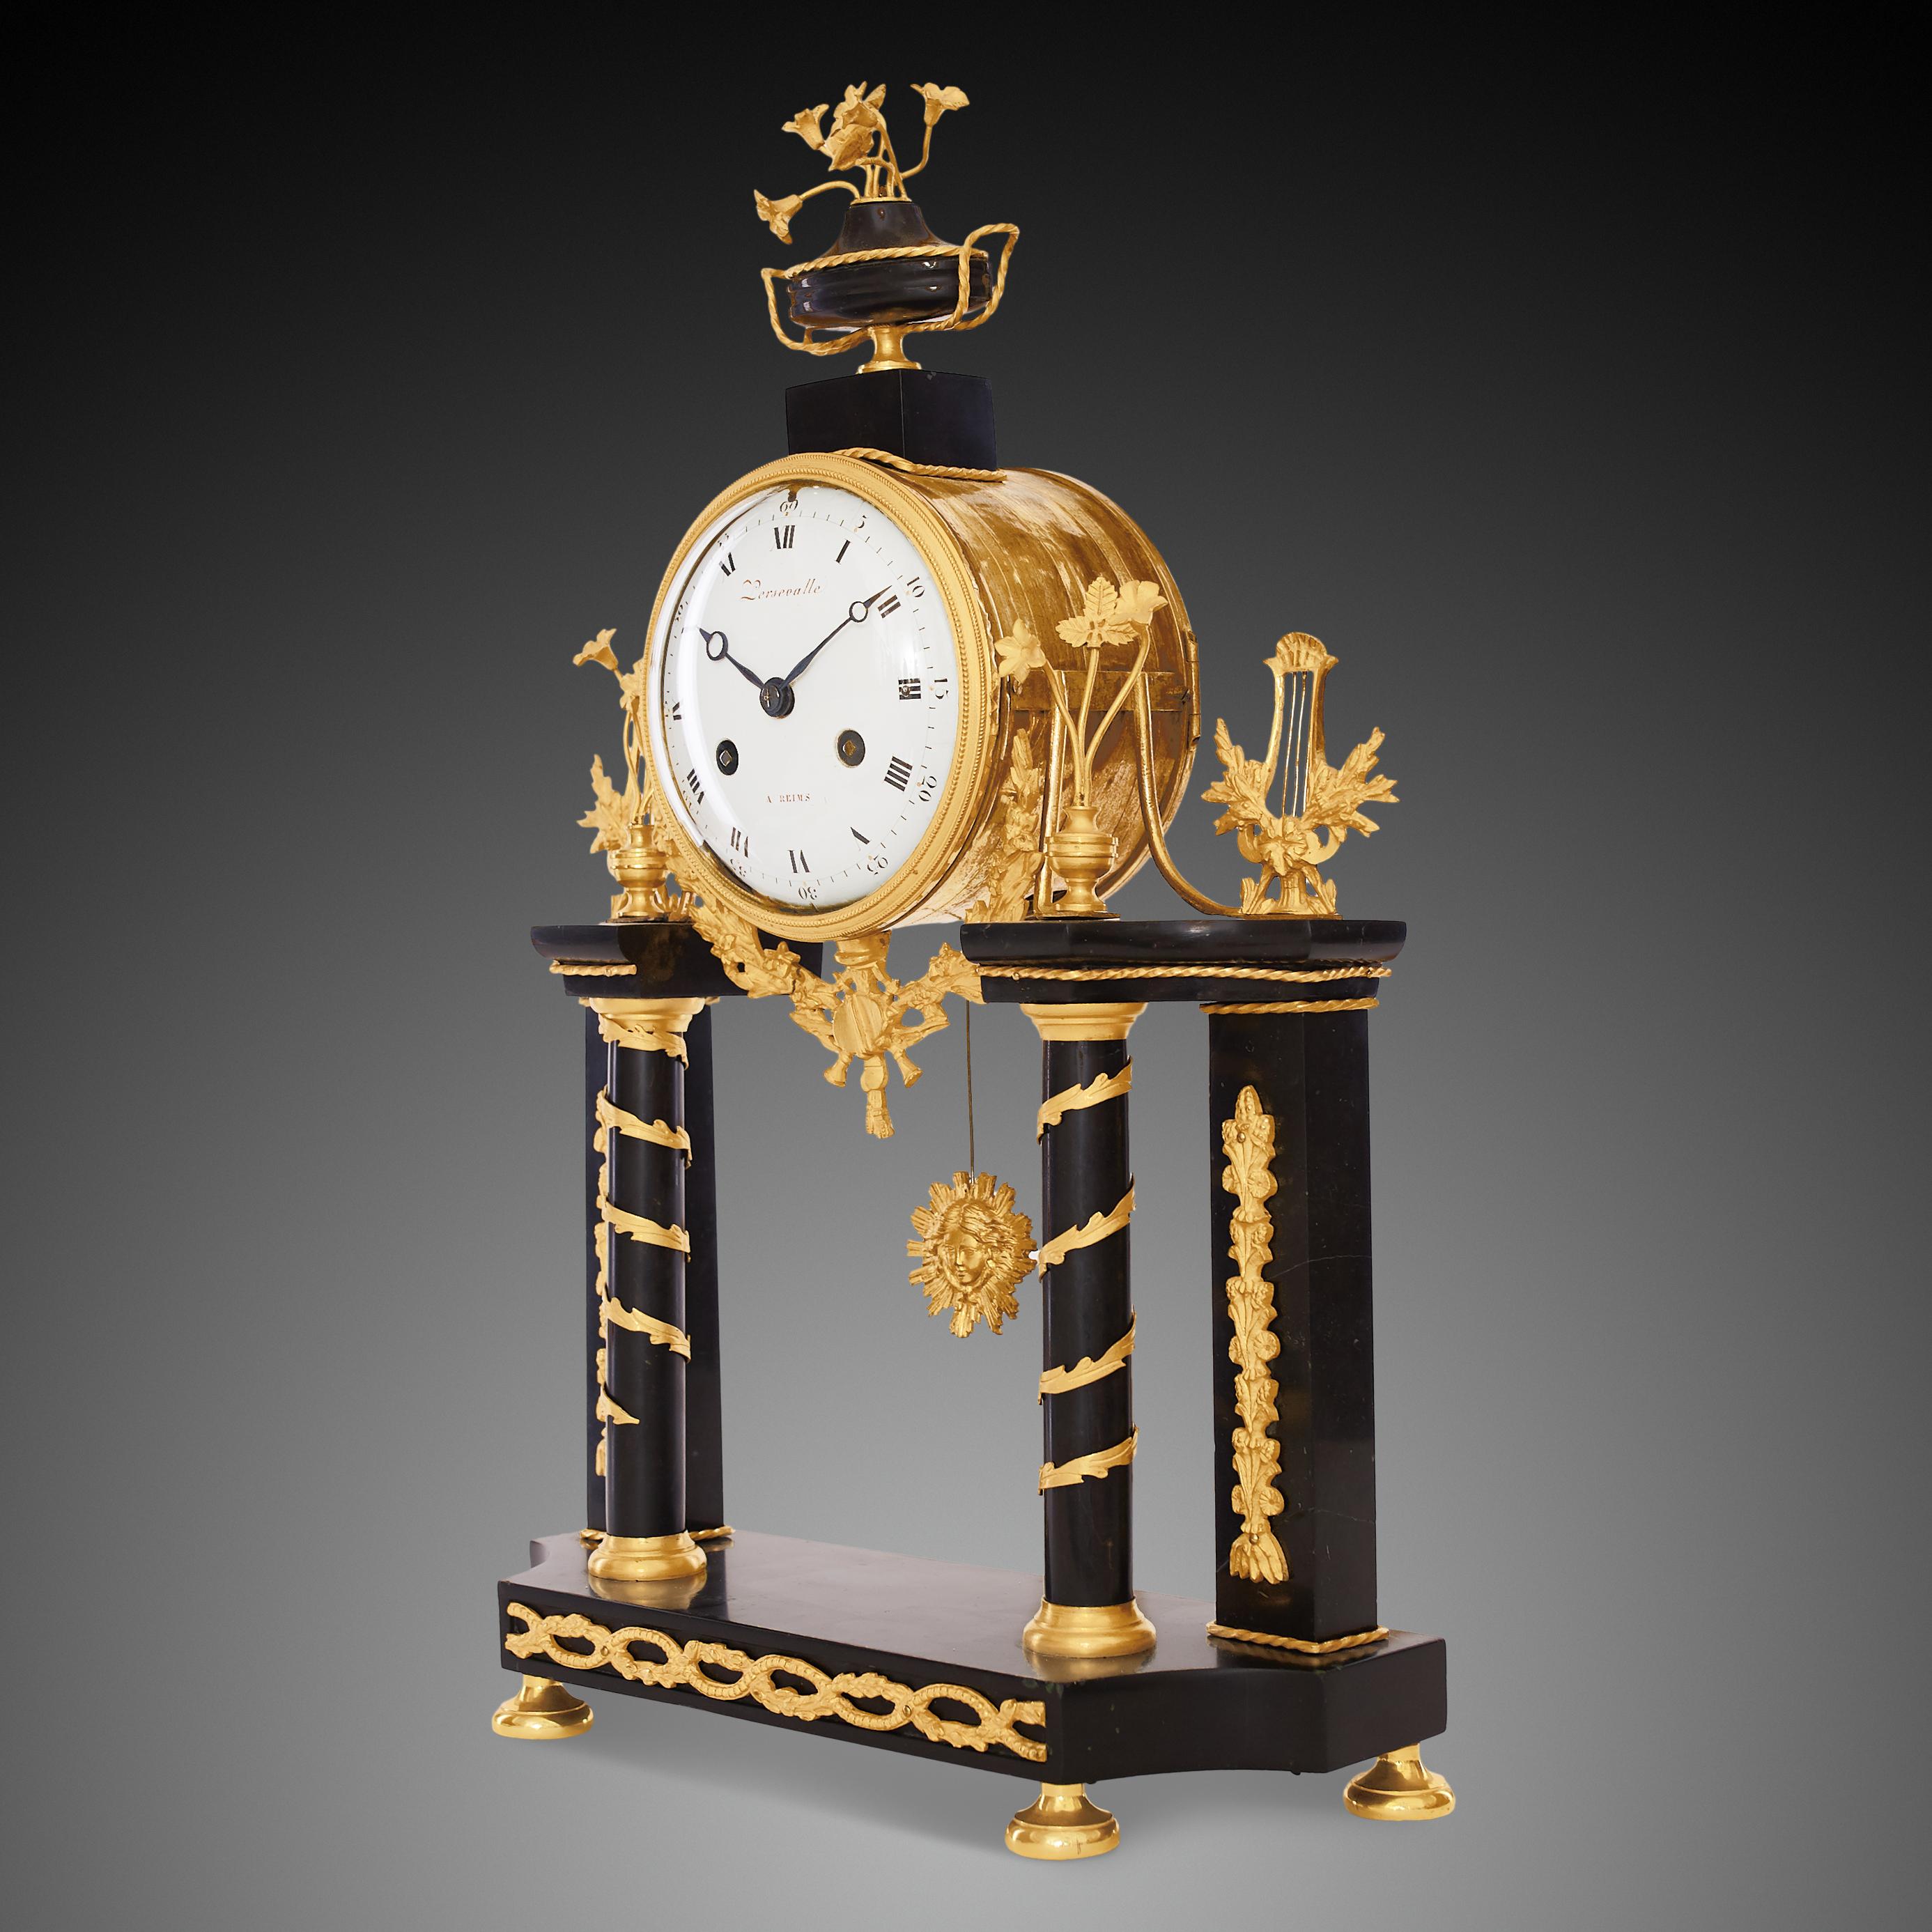 Portico clock signed “Persevalle à Reims”
This refined portico clock crafted in transitional Louis XVI – Empire style from ormolu and black marble is signed on the dial “Persevalle à Reims”. The Empire style was based on elements of the Roman